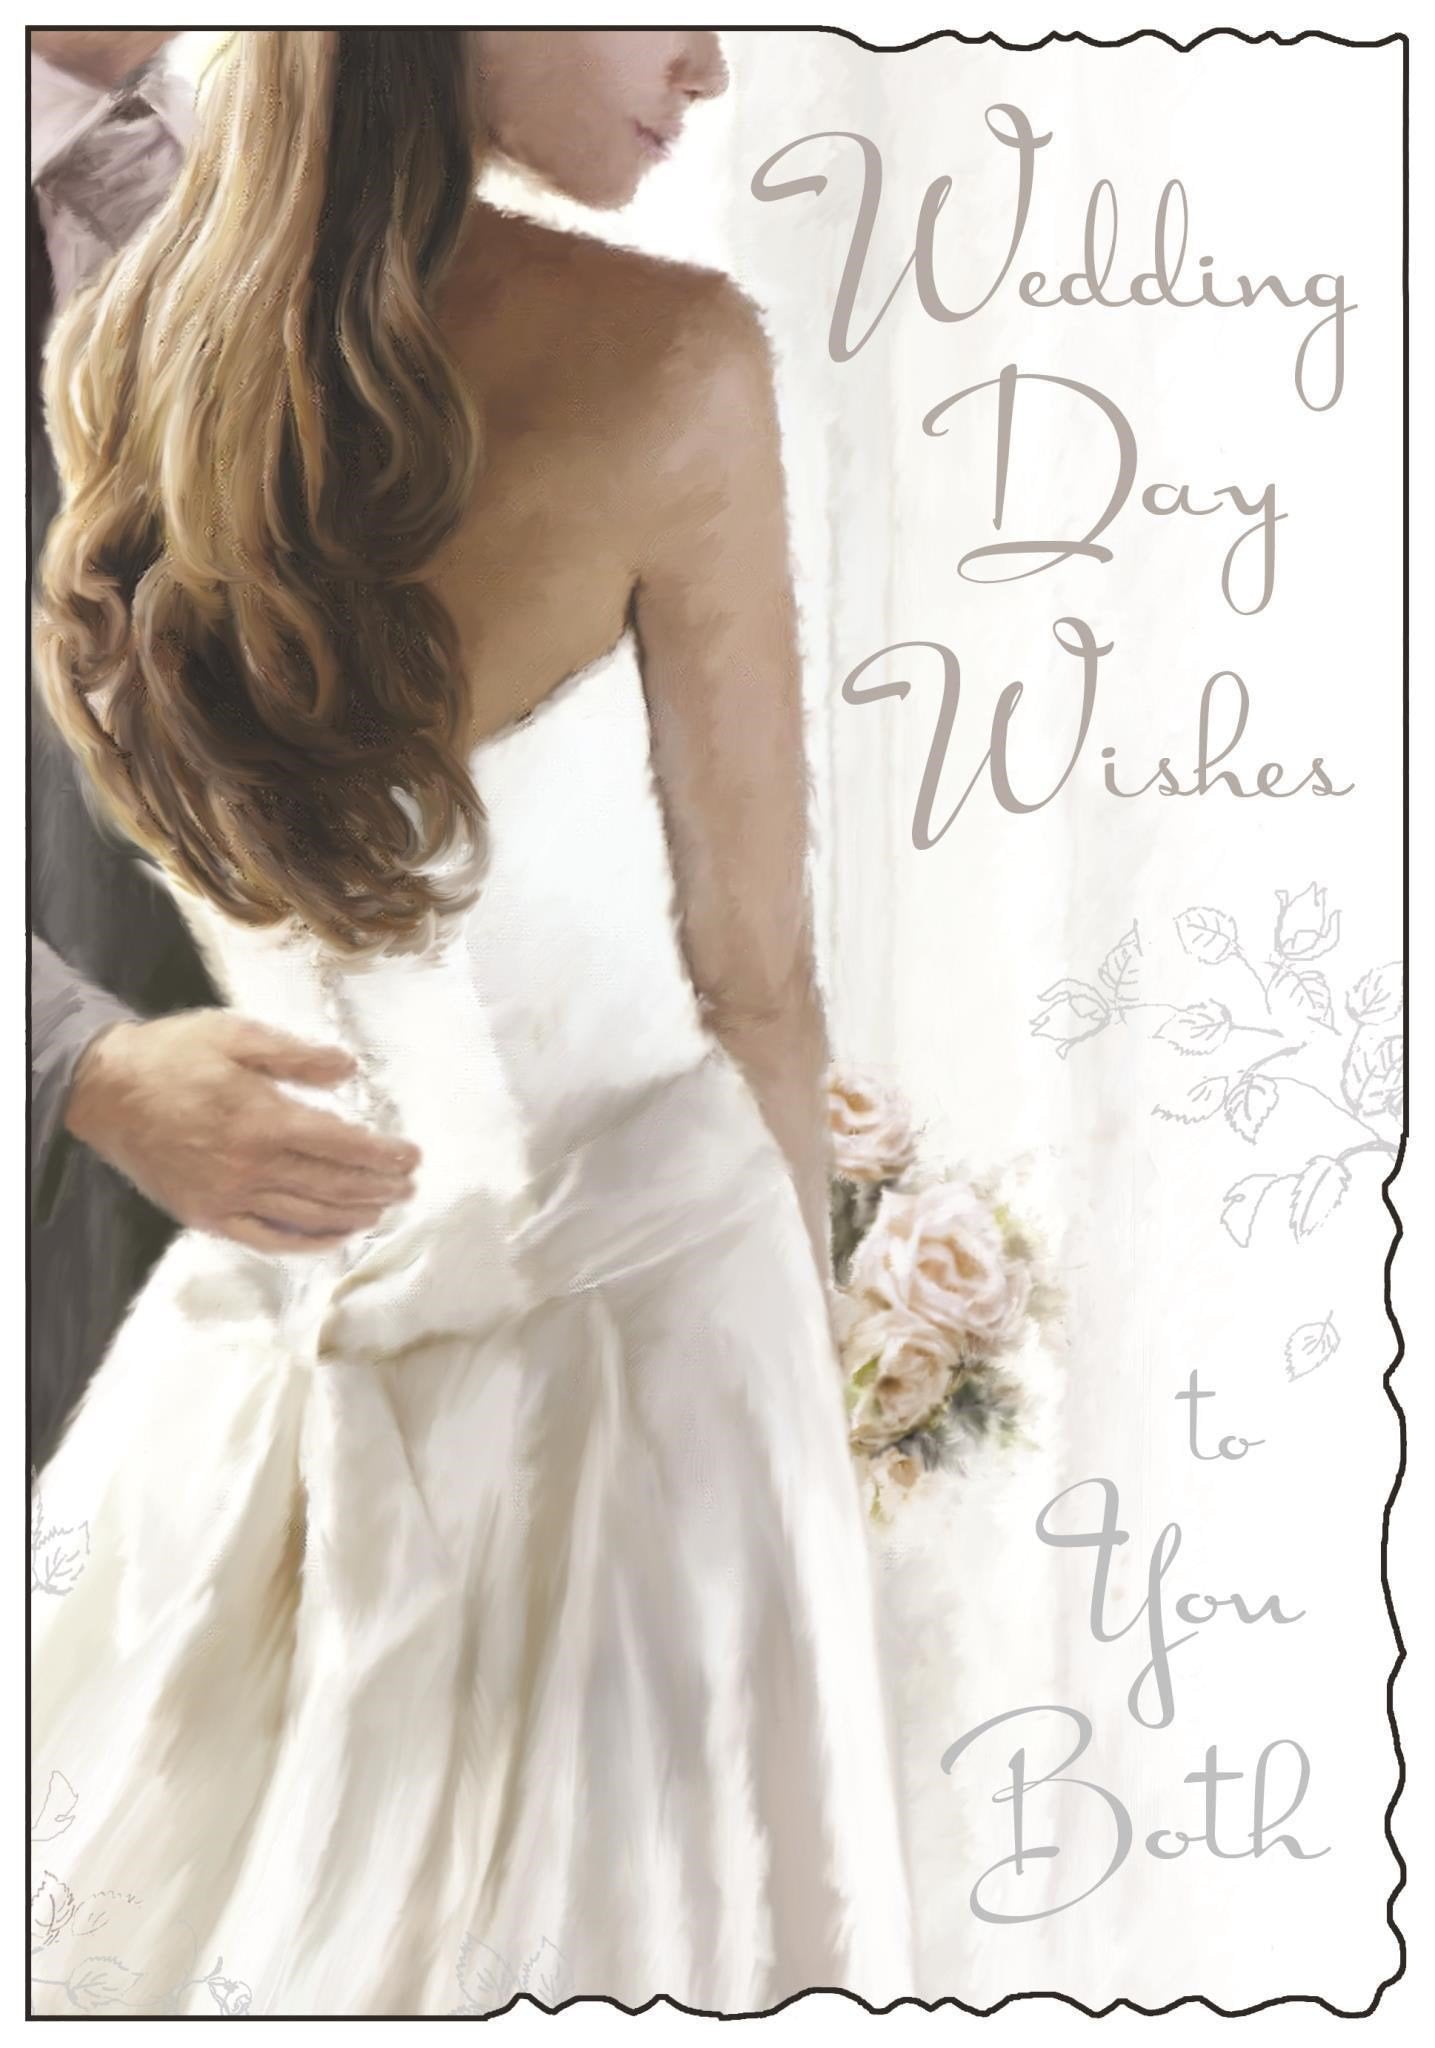 Front of Wedding Day Wishes to Both Greetings Card